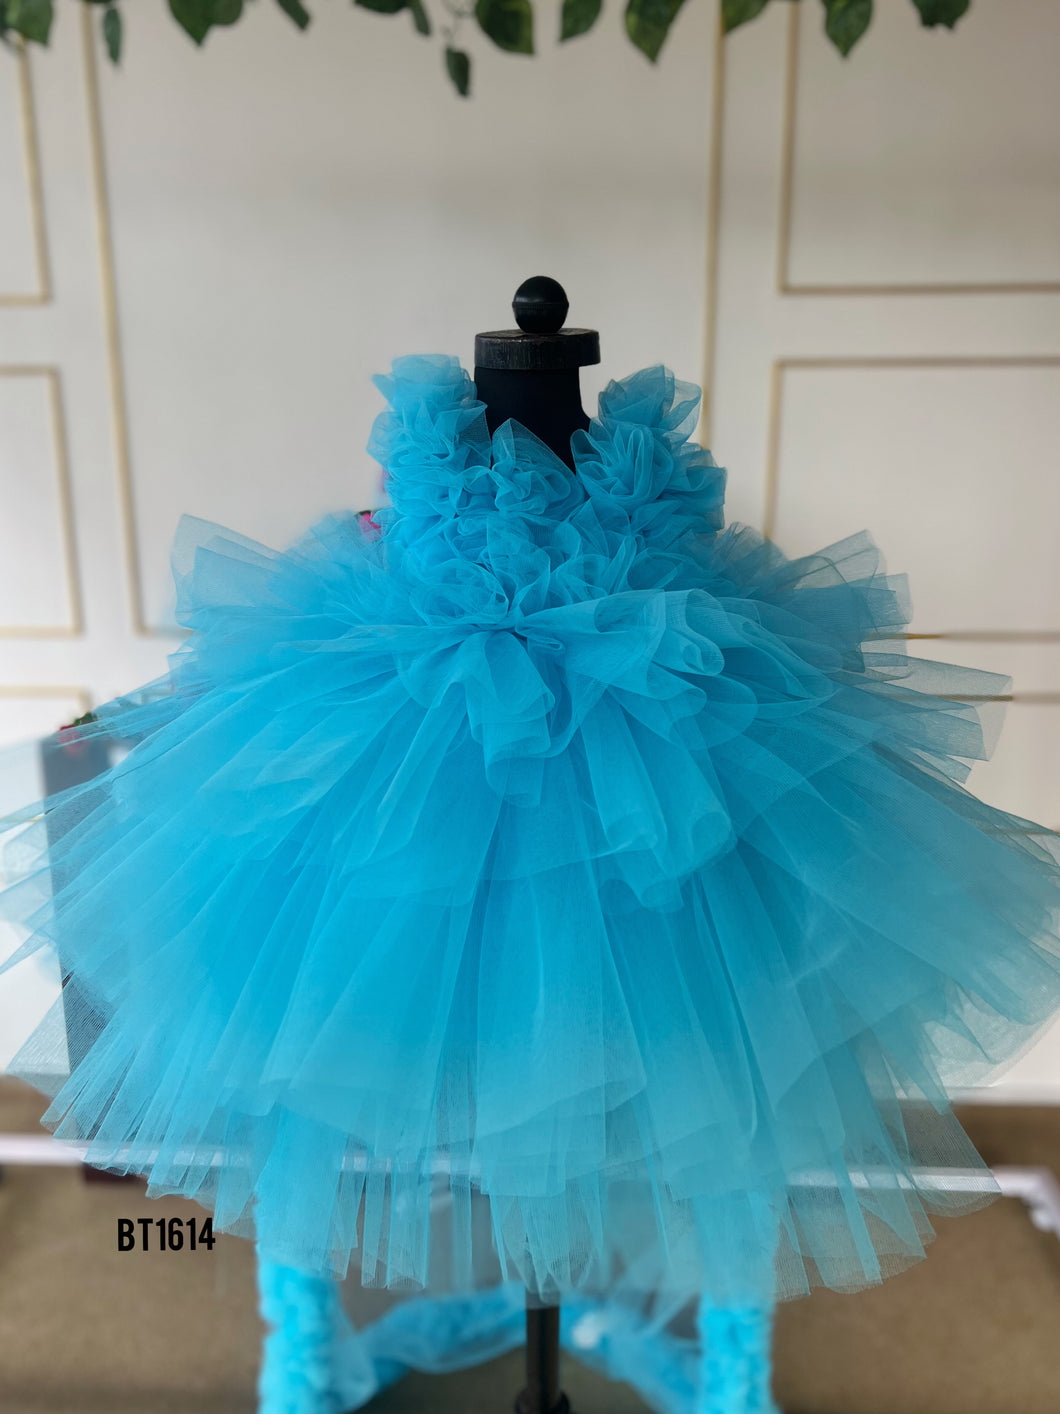 BT1614 Turquoise Twirl: A Cascade of Blue for Your Little Dancer